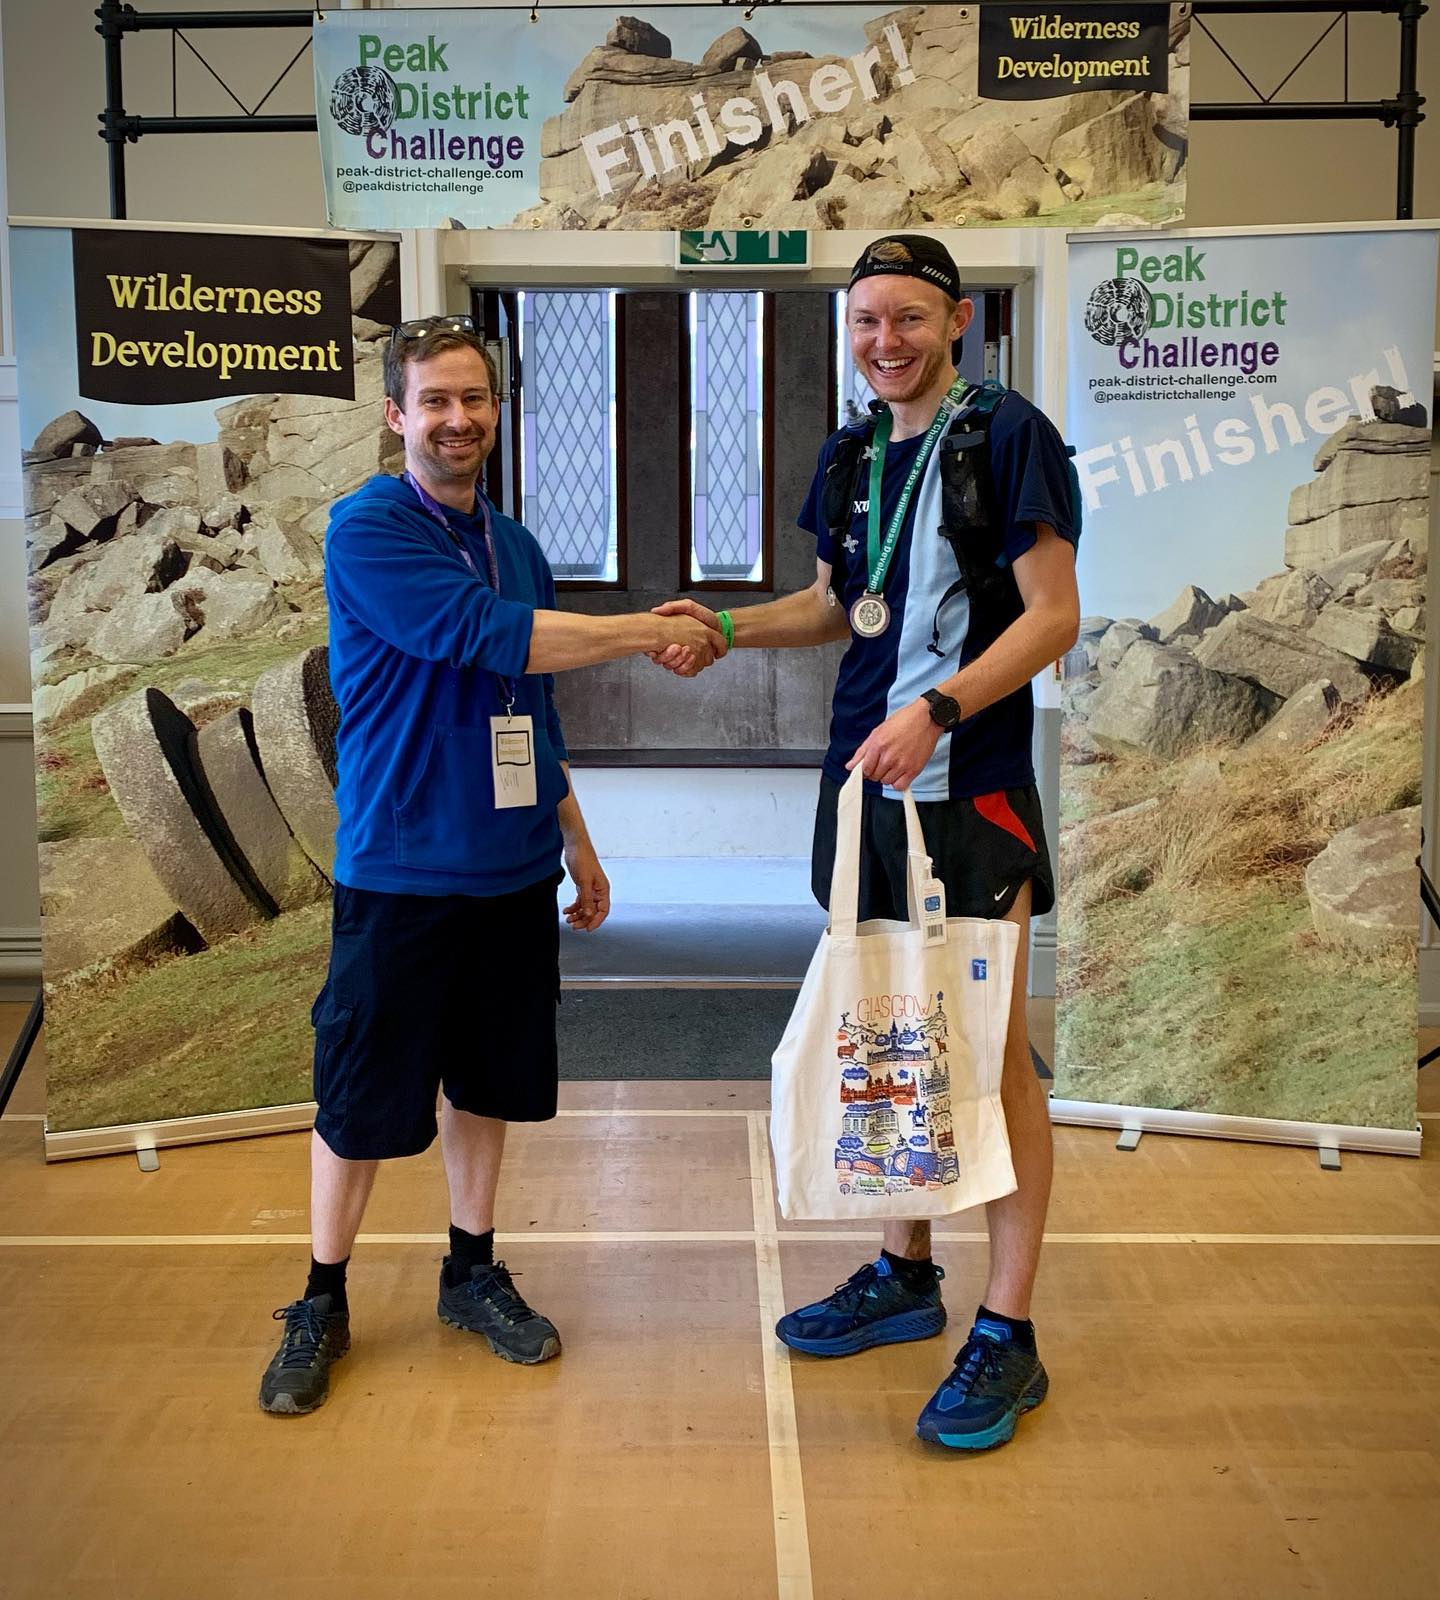 Our first Gold Ultra finisher is back as well! Chris Rushworth completed his 100km in 12 hours an...